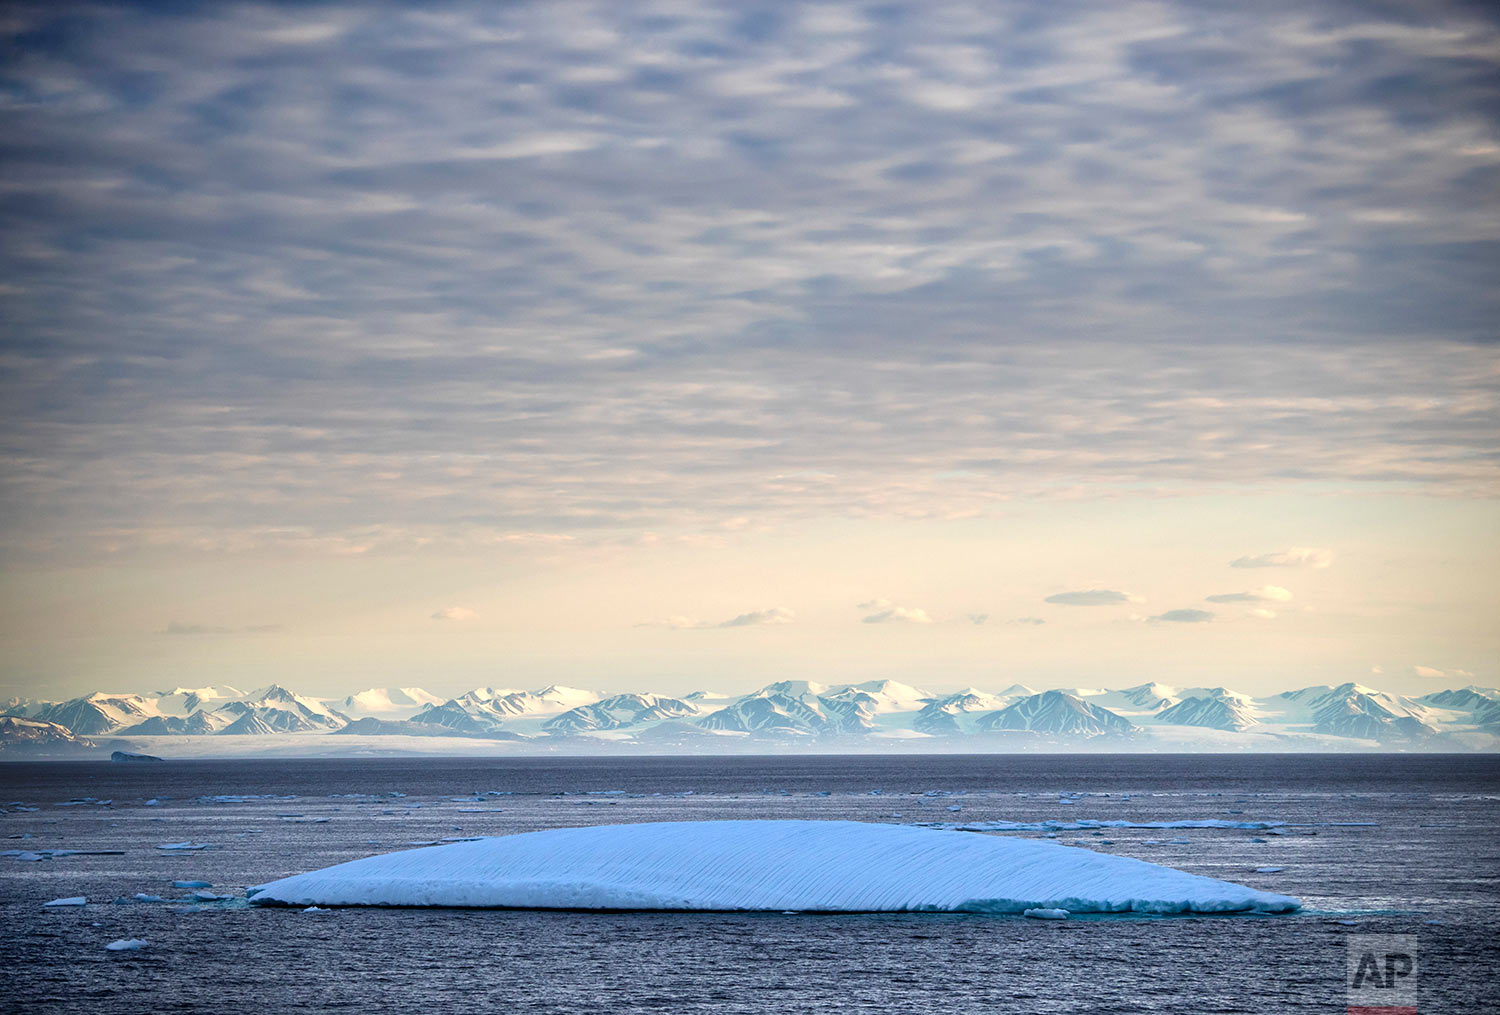  An iceberg floats past Bylot Island in the Canadian Arctic Archipelago, Monday July. 24, 2017. If parts of the planet are becoming like a furnace because of global warming, then the Arctic is best described as the world's air-conditioning unit. The 